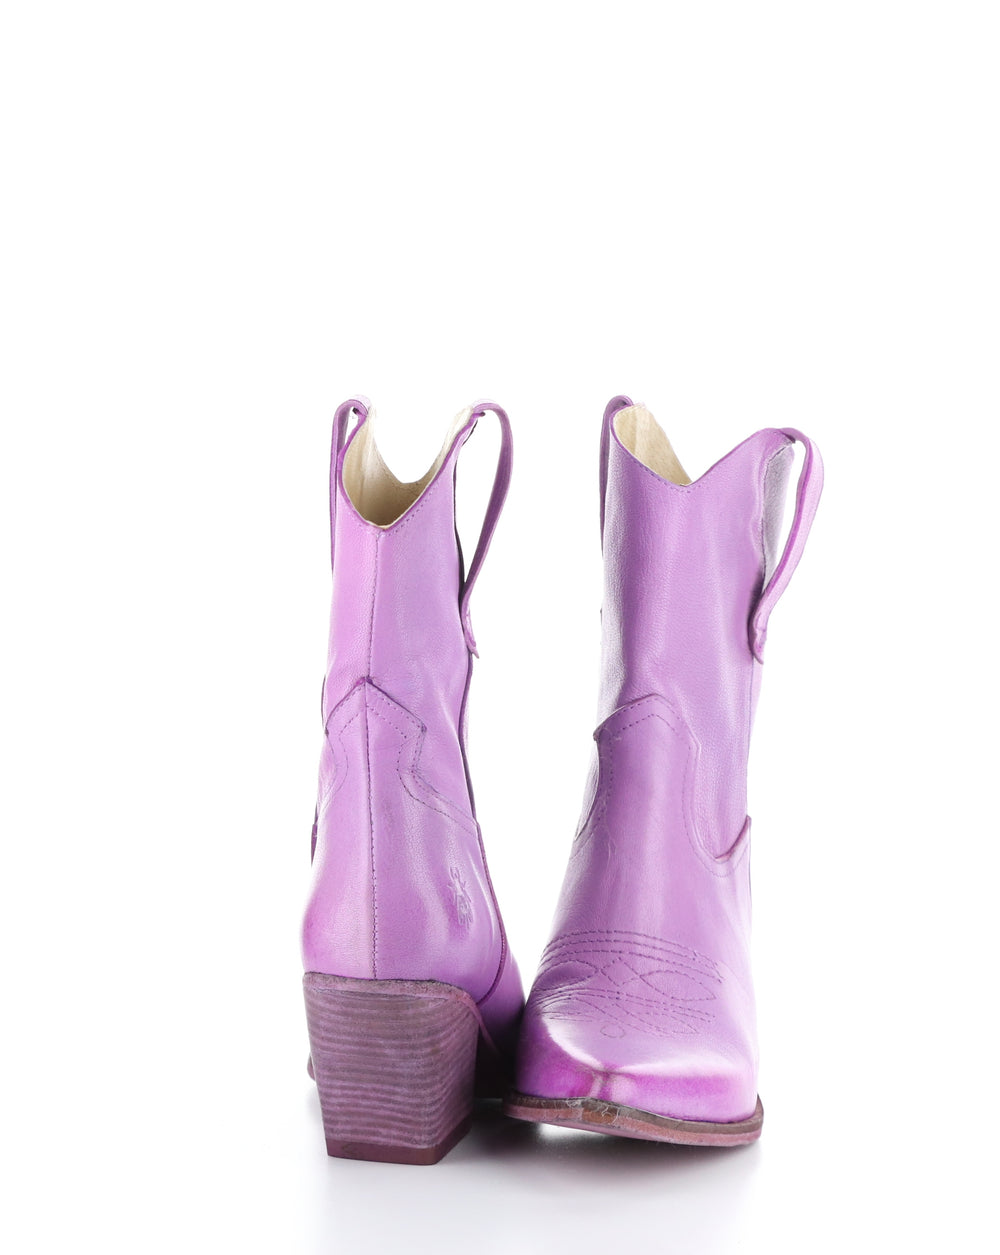 WOFY093FLY 001 VIOLET Cowboy Boots